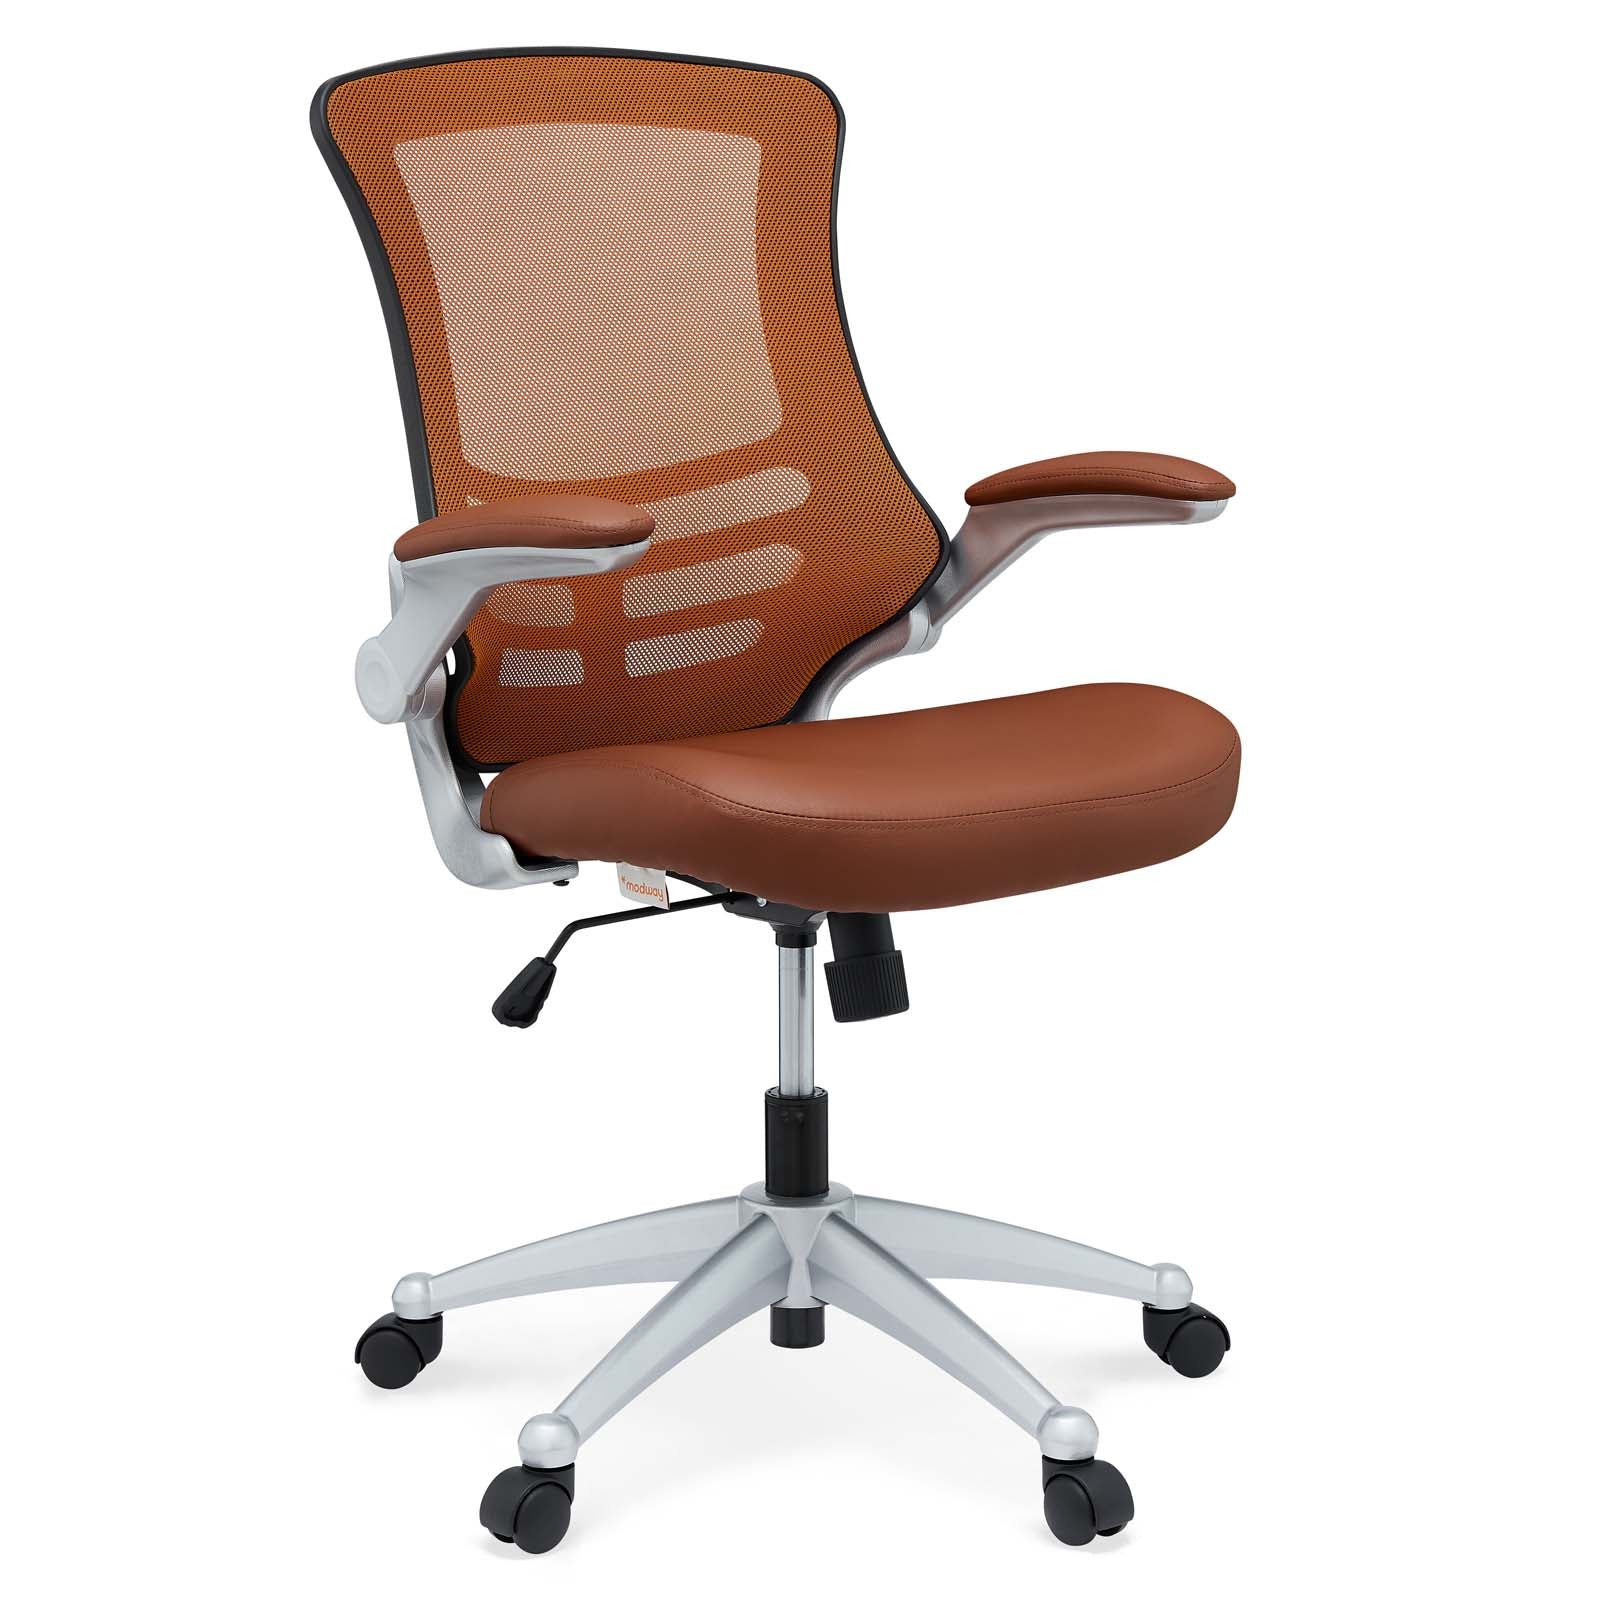 Red Attainment Office Chair with Backmesh at BUILDMyplace